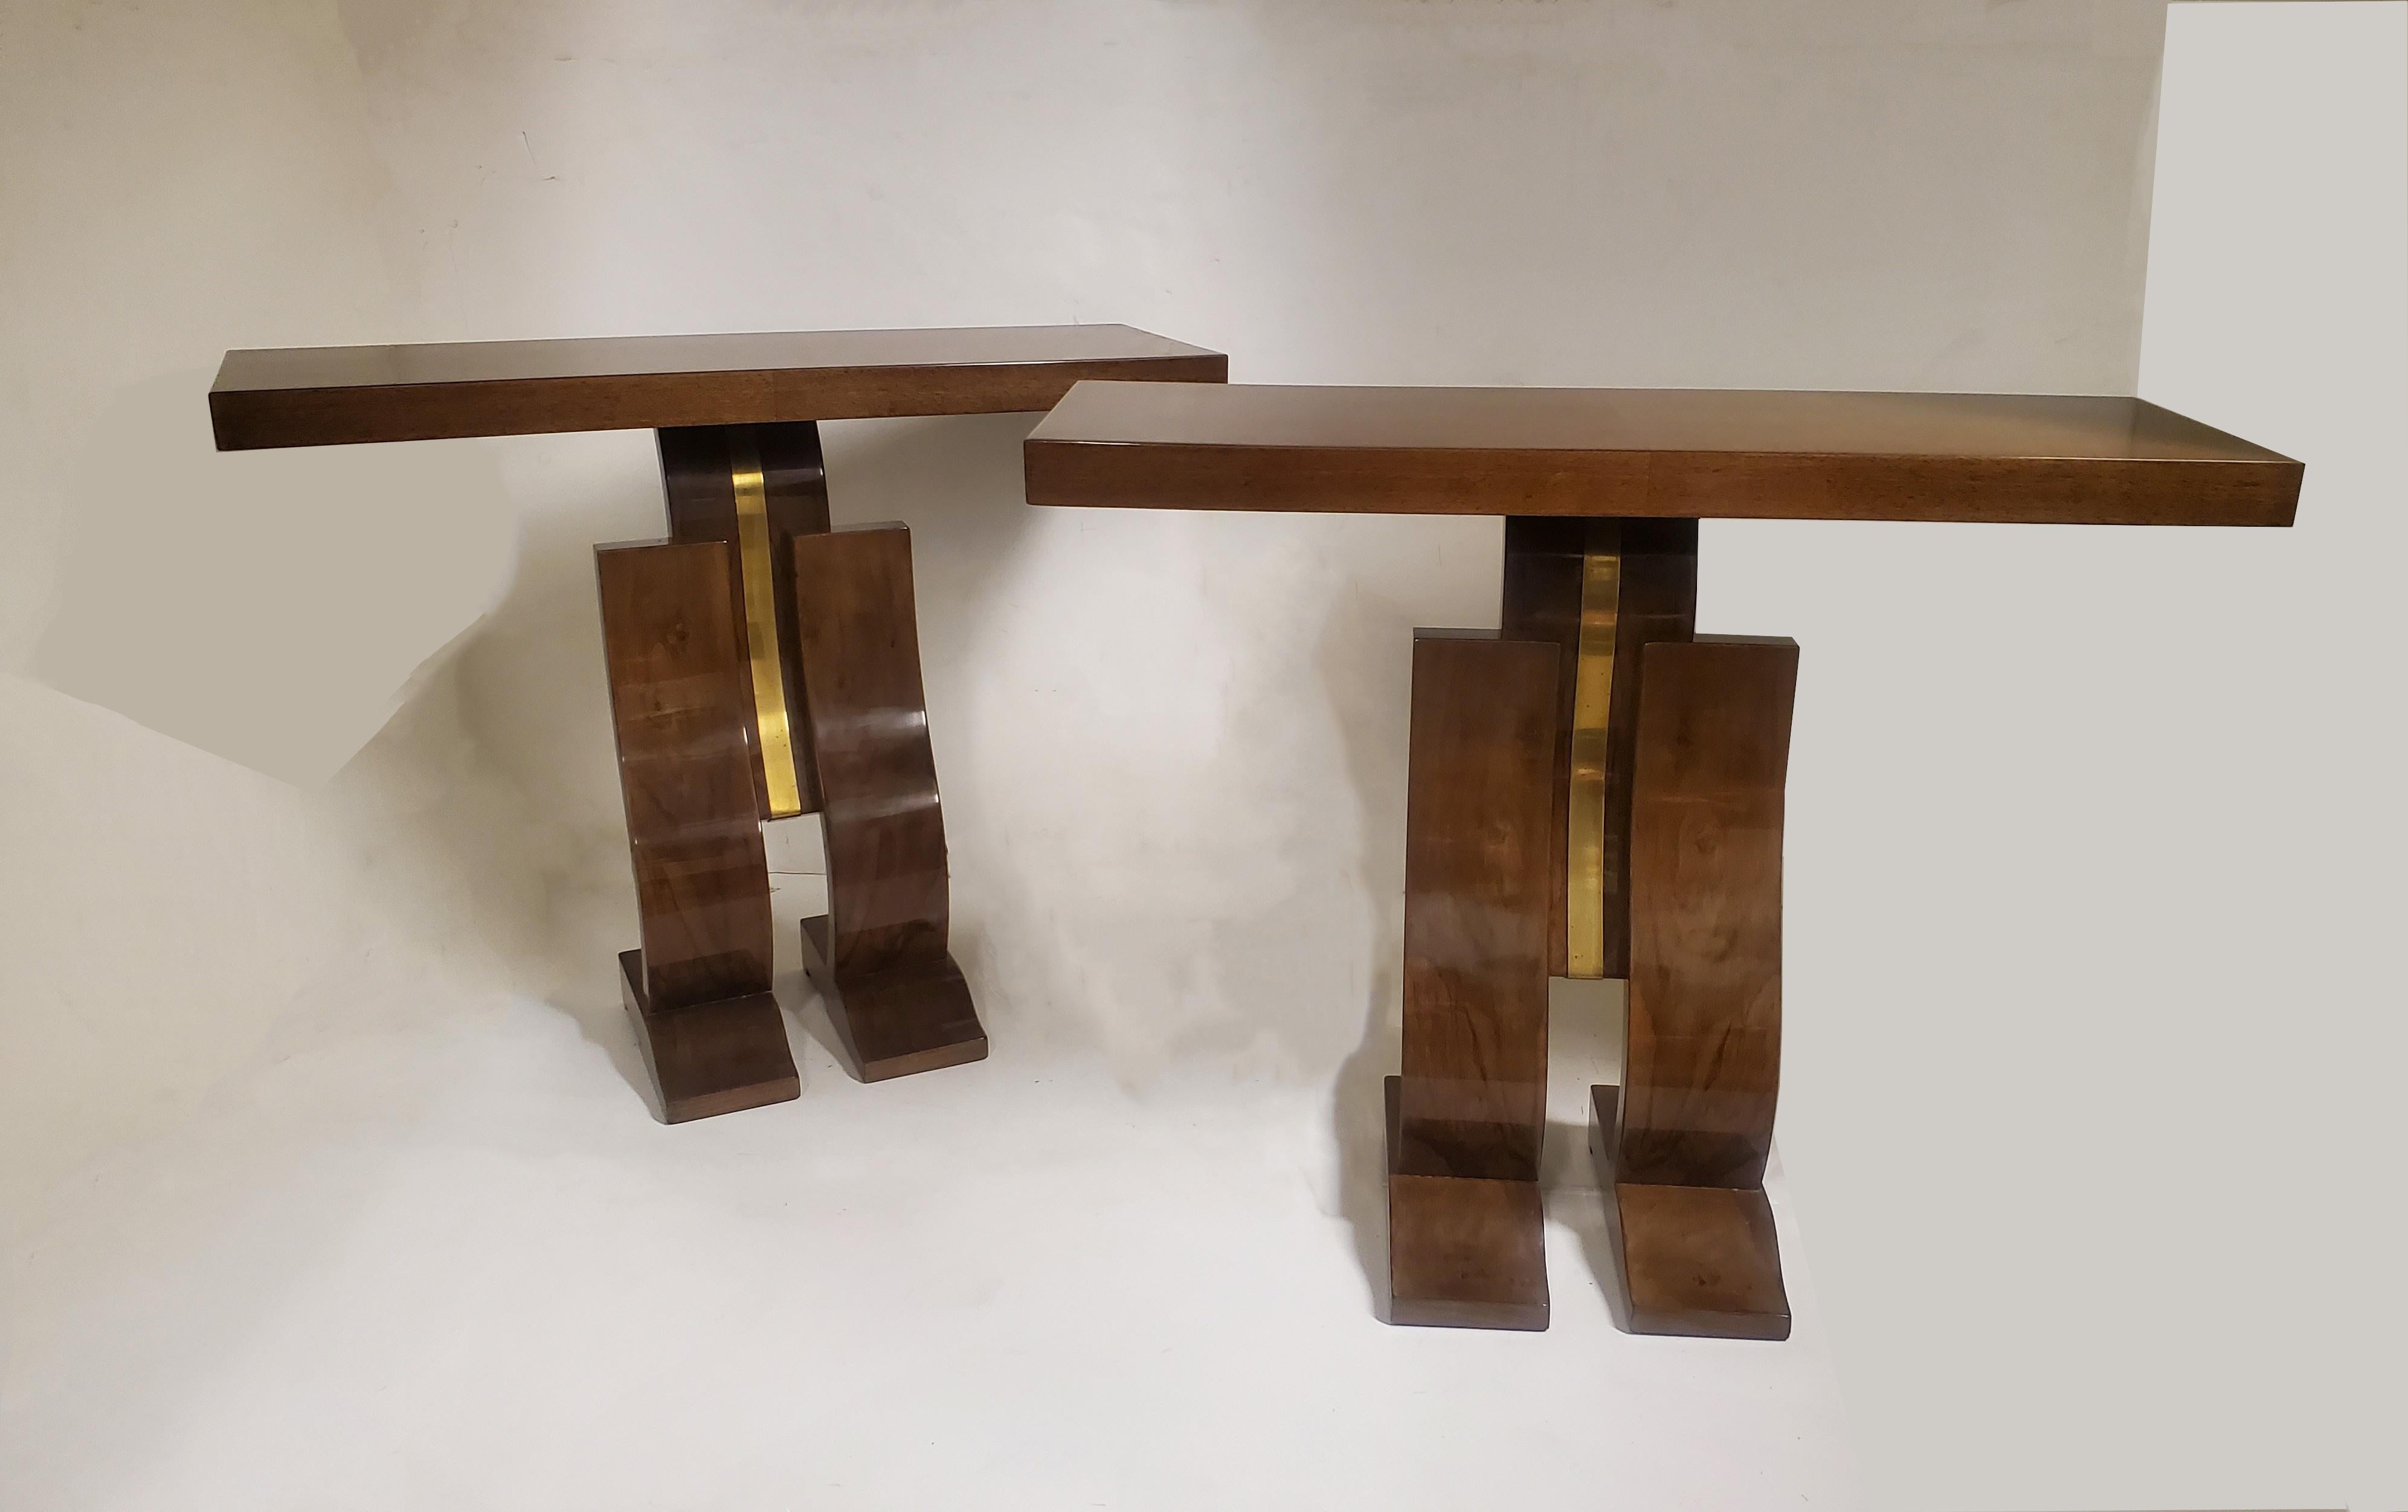 A graceful and elegant pair of French Modern walnut and brass “L” curve consoles. These fabulous original consoles portray simple cubist, angular style, yet are juxtaposed with undulating and curvilinear forms.
Conjoined triple leg design and raised